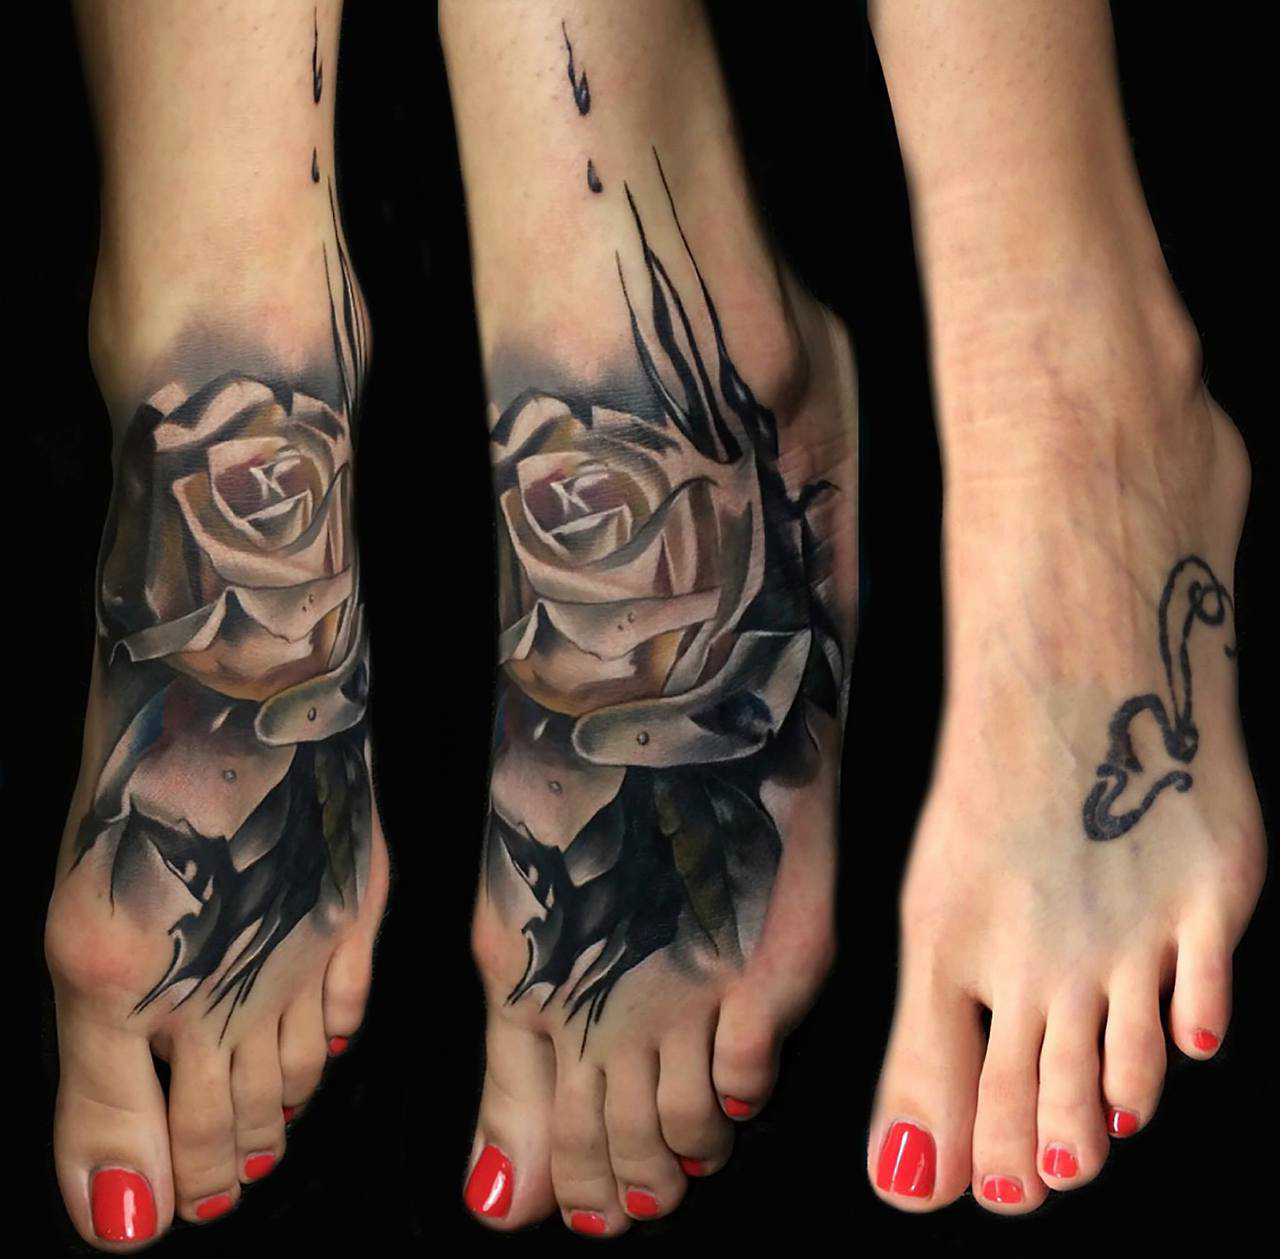 Foot Rose Cover Up tattoo design